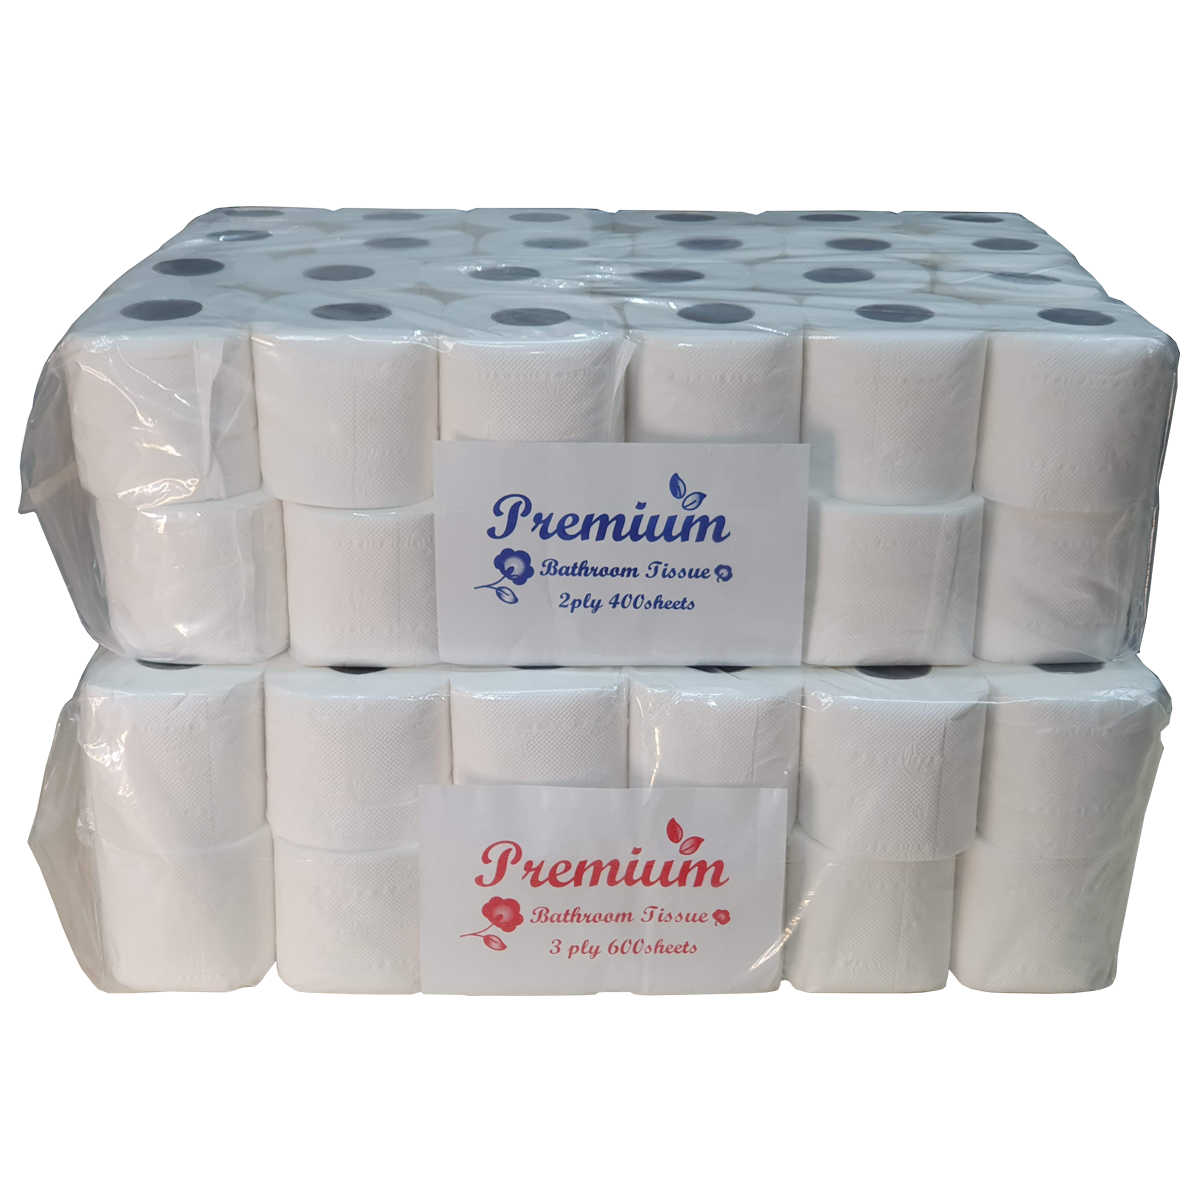 Premium Tissue Roll 2-ply 400 sheets Toilet Paper, 48 rolls